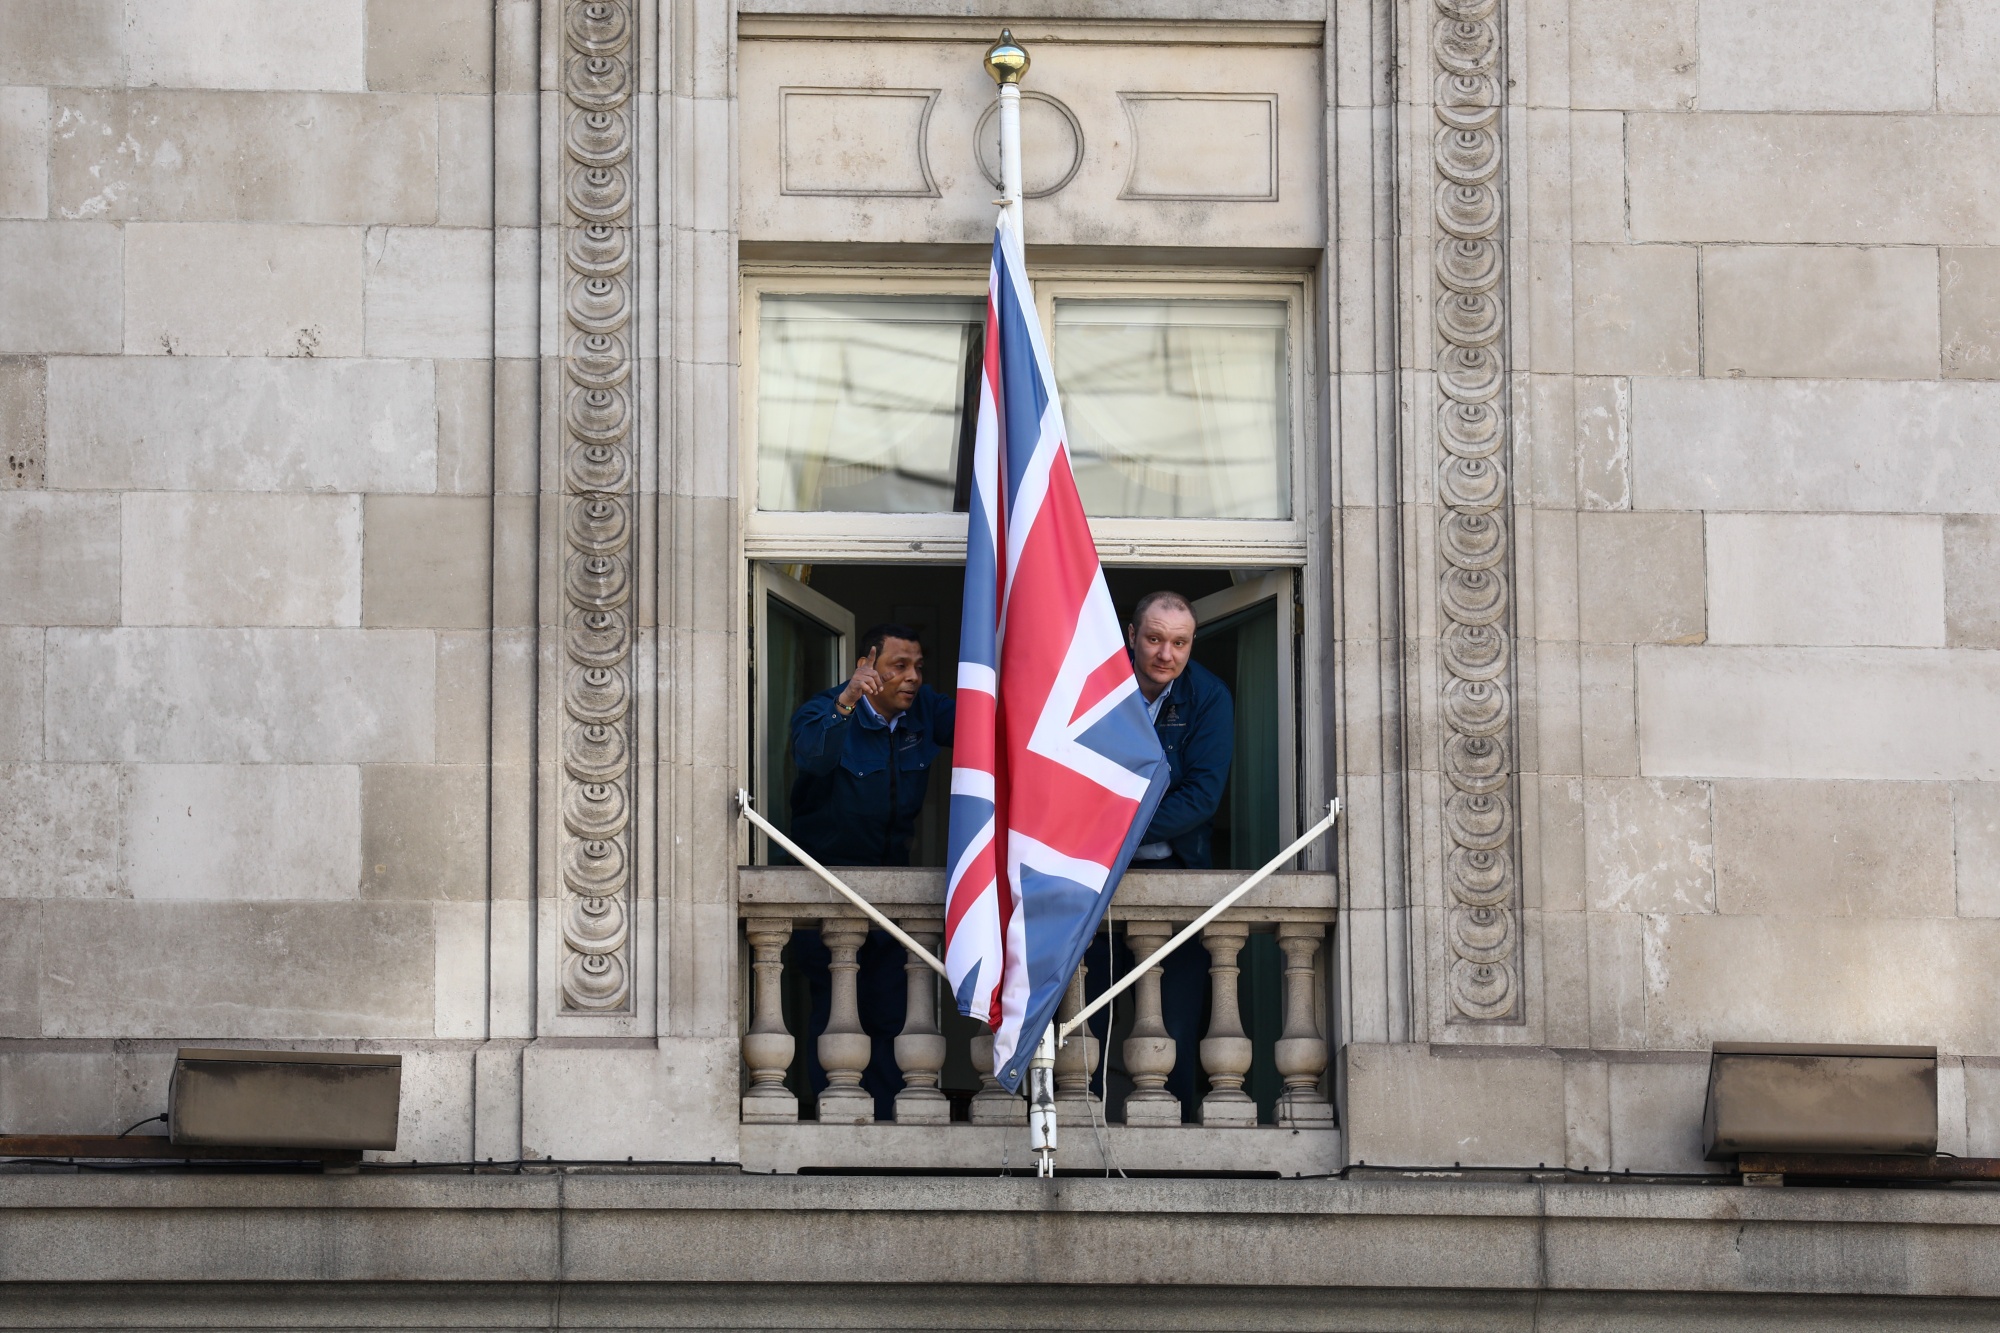 Workers at the shuttered The Ritz hotel bring in a British Union Flag, also known as Union Jack, in London.